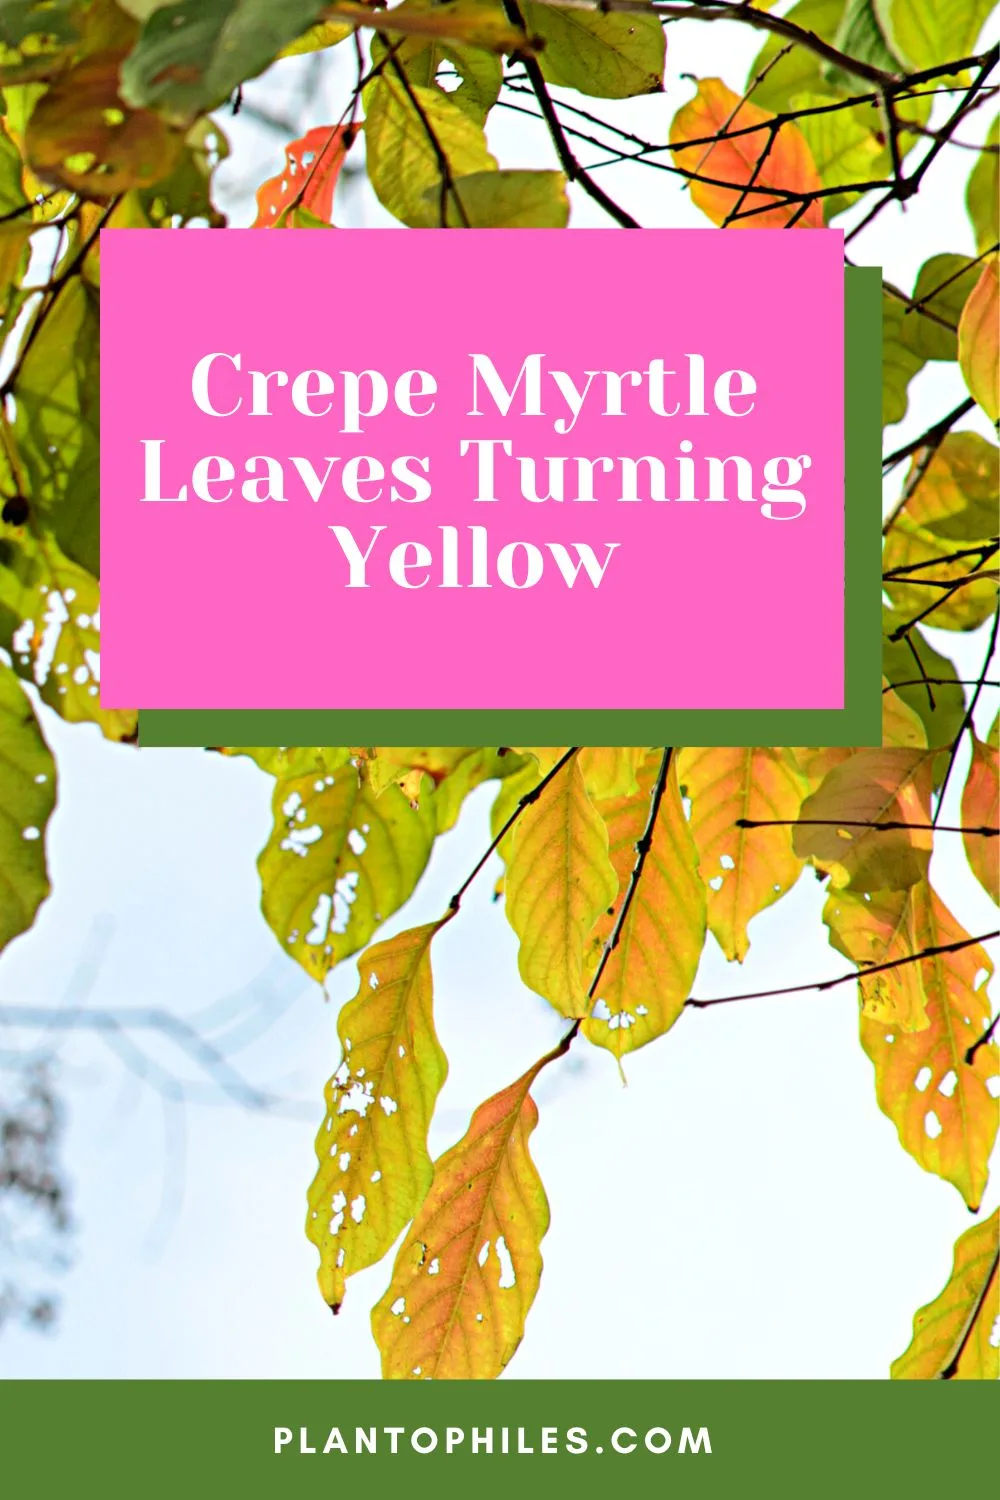 Crepe Myrtle Leaves Turning Yellow